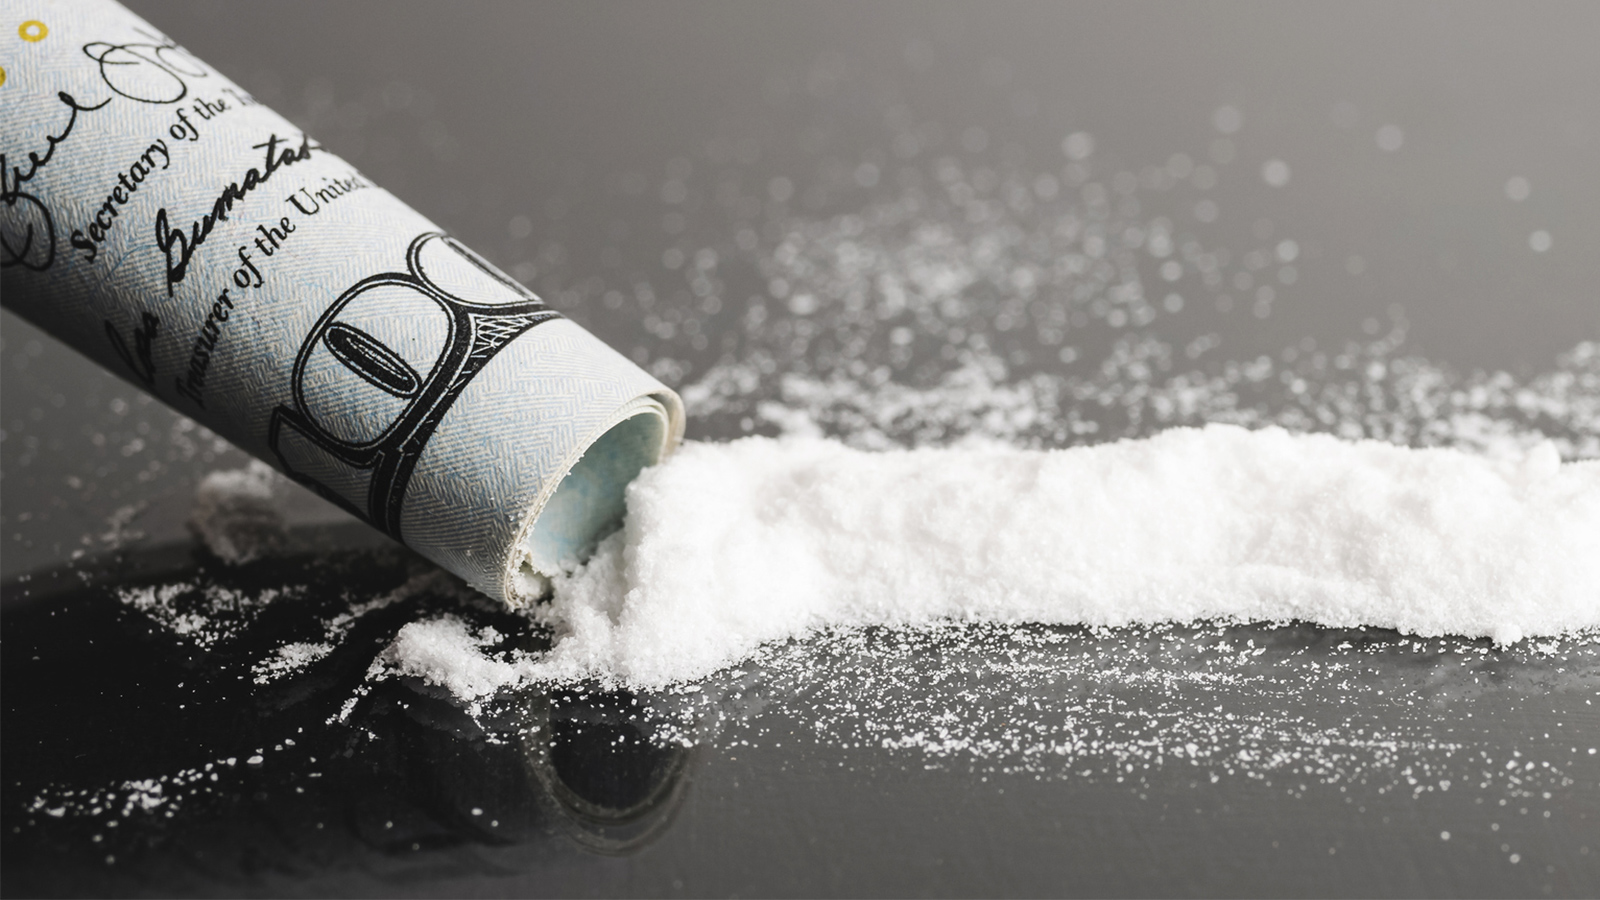 Doctors warn users can overdose on snortable caffeine powder